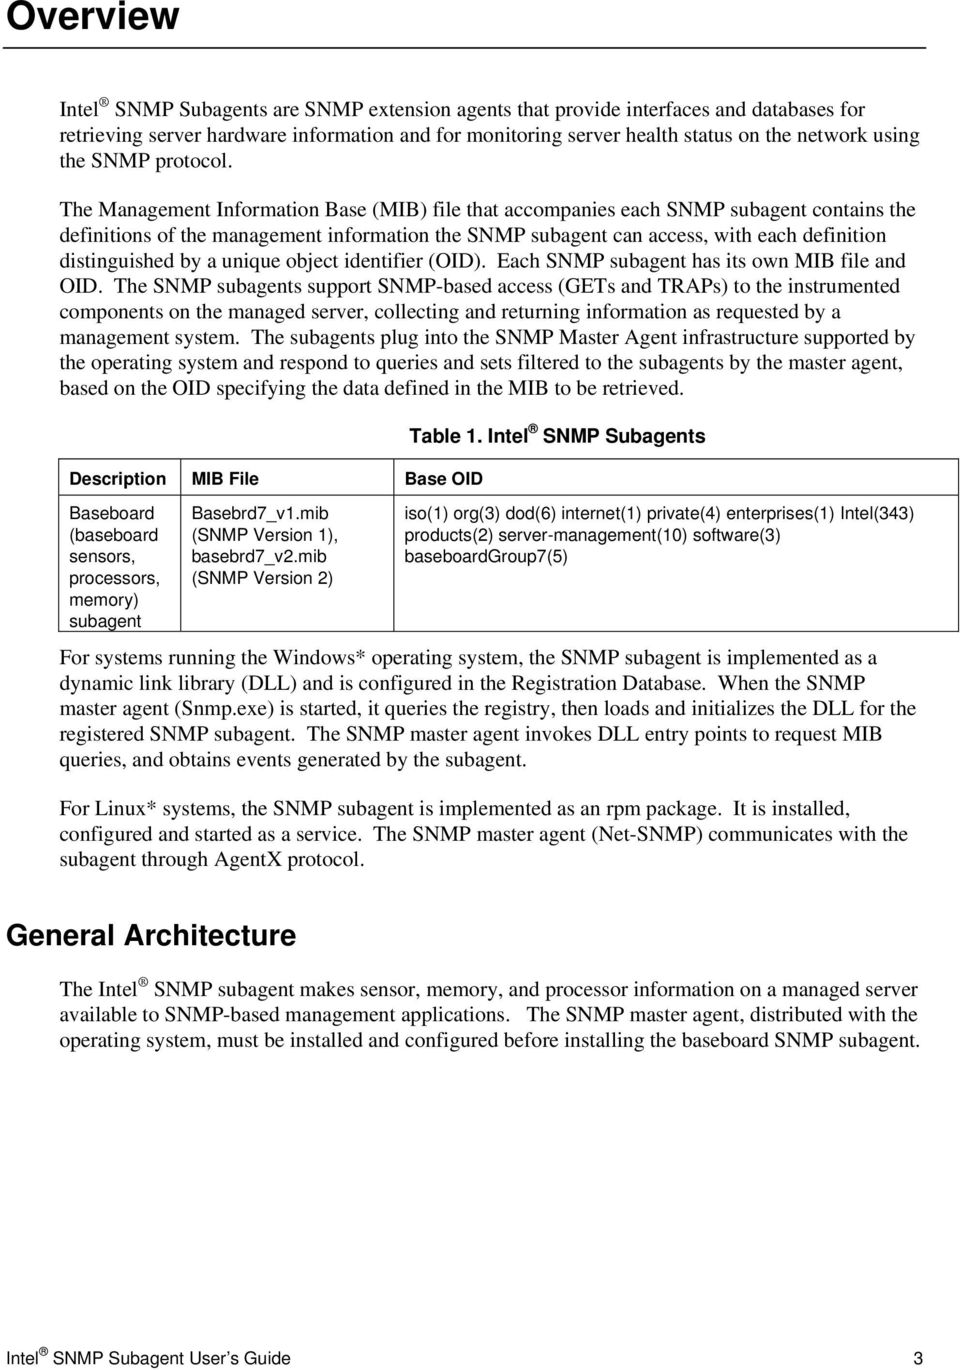 The Management Information Base (MIB) file that accompanies each SNMP subagent contains the definitions of the management information the SNMP subagent can access, with each definition distinguished